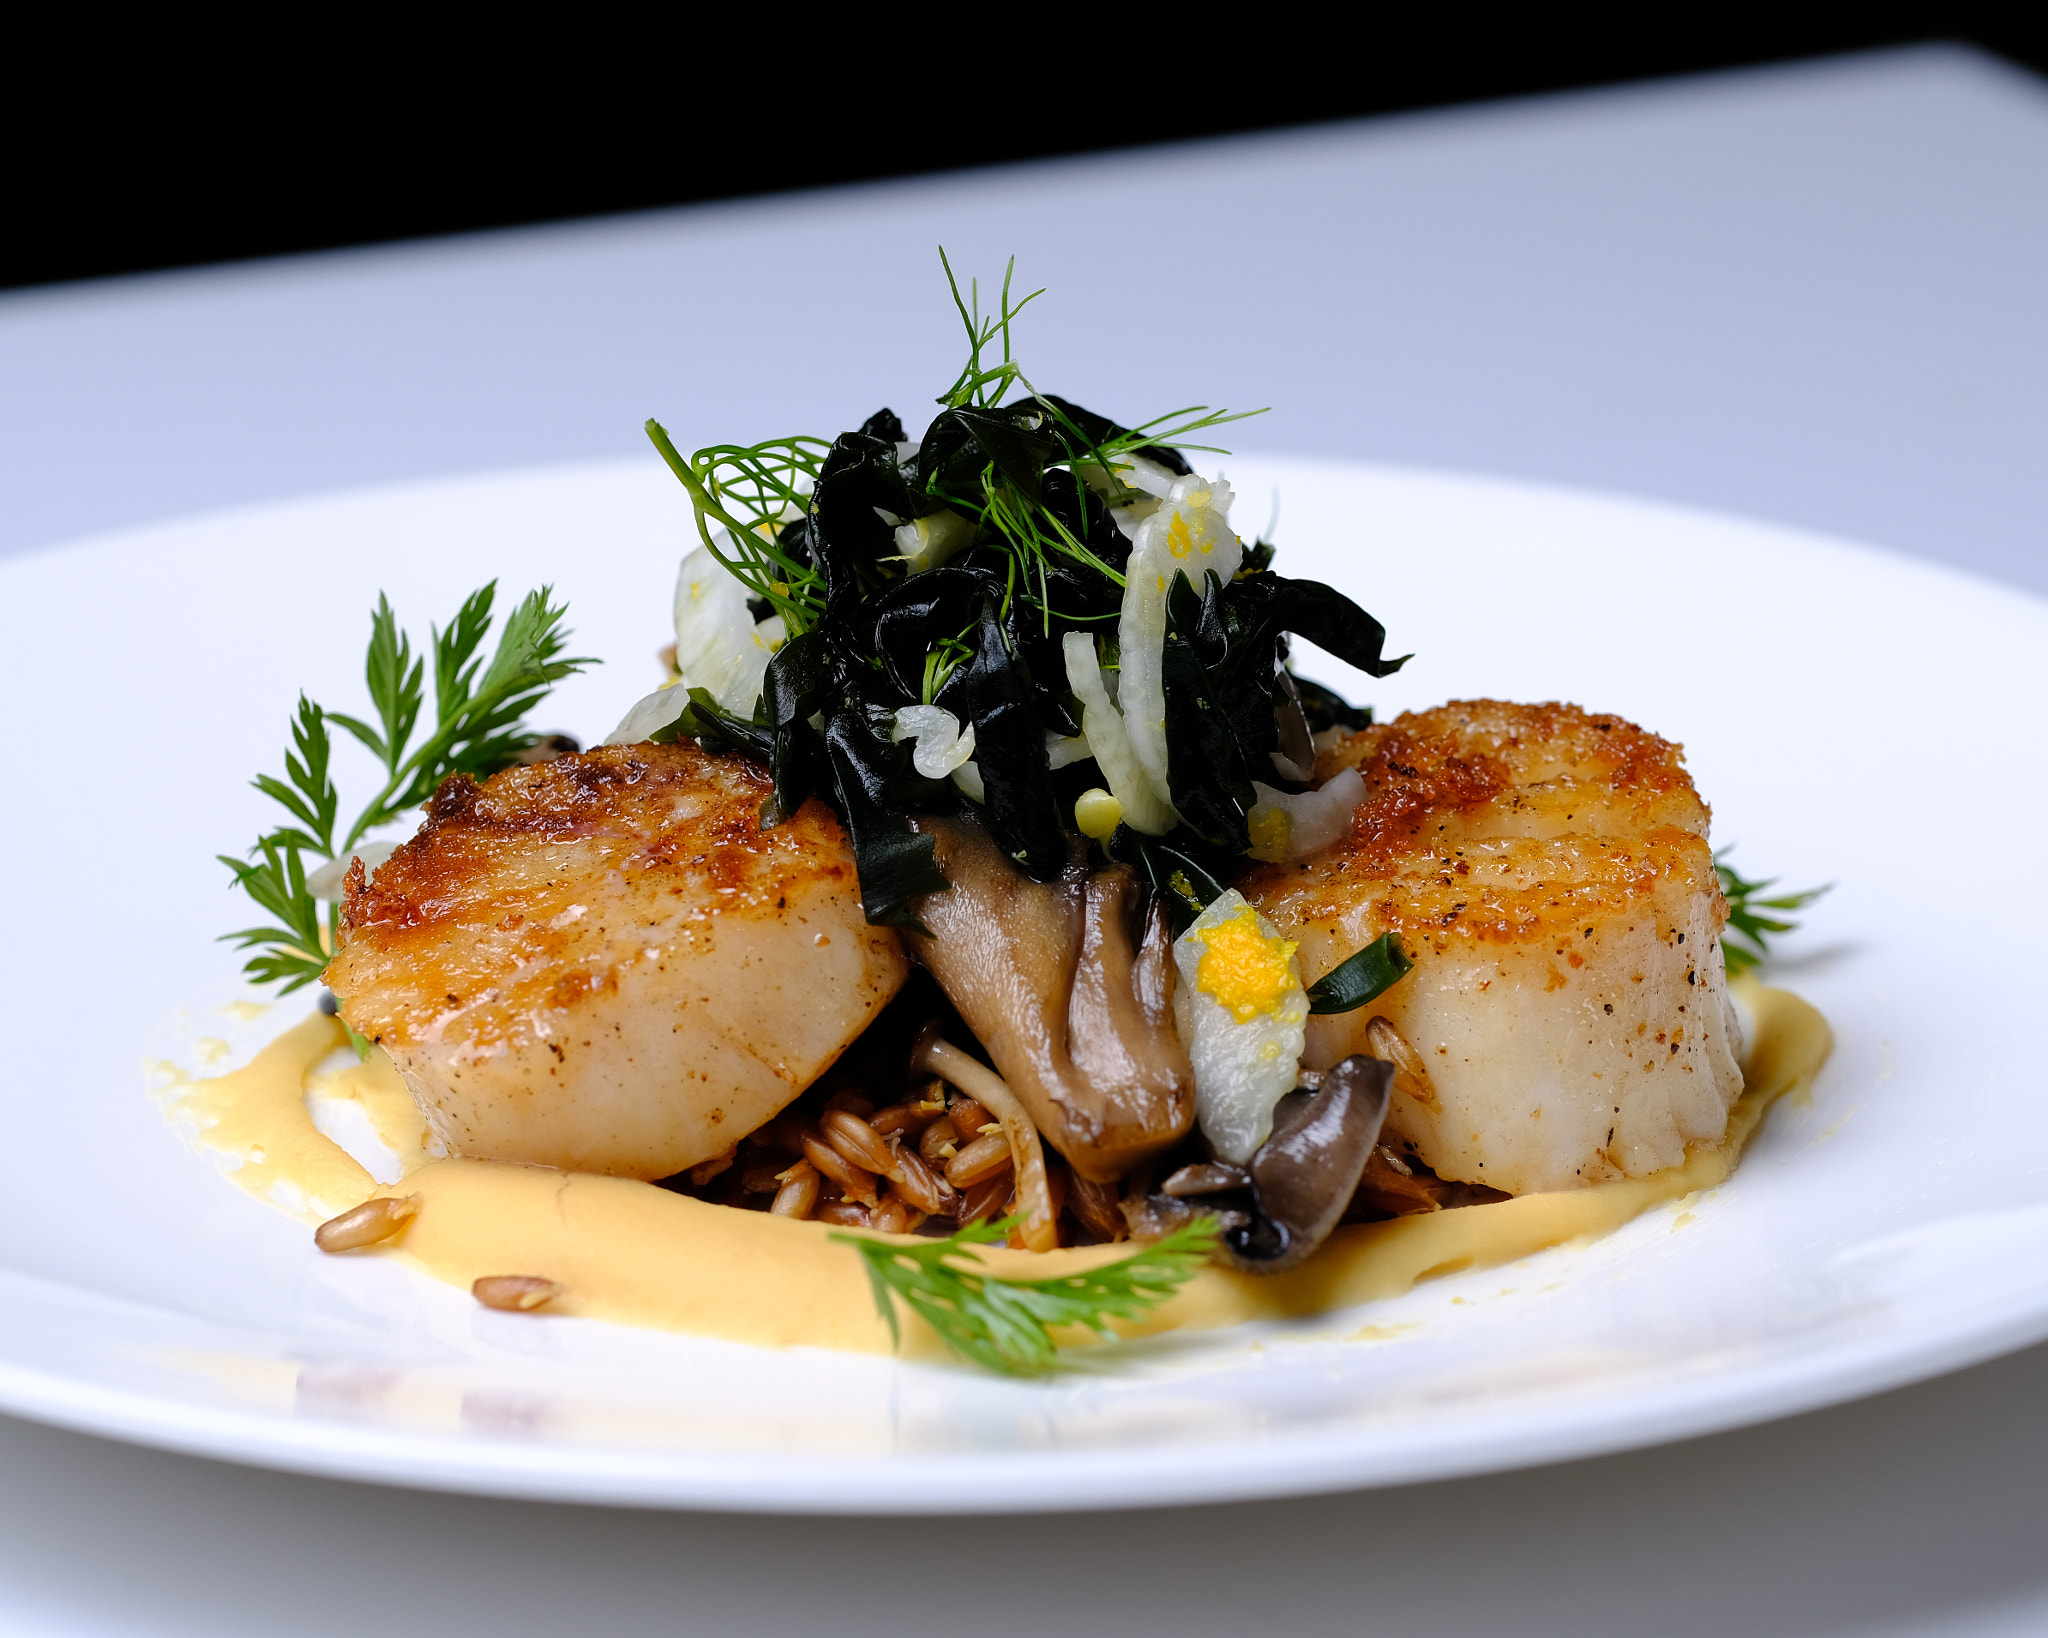 Fujifilm X-Pro2 sample photo. Seared digby scallops, yellow lentil puree, wake & shaved fennel photography